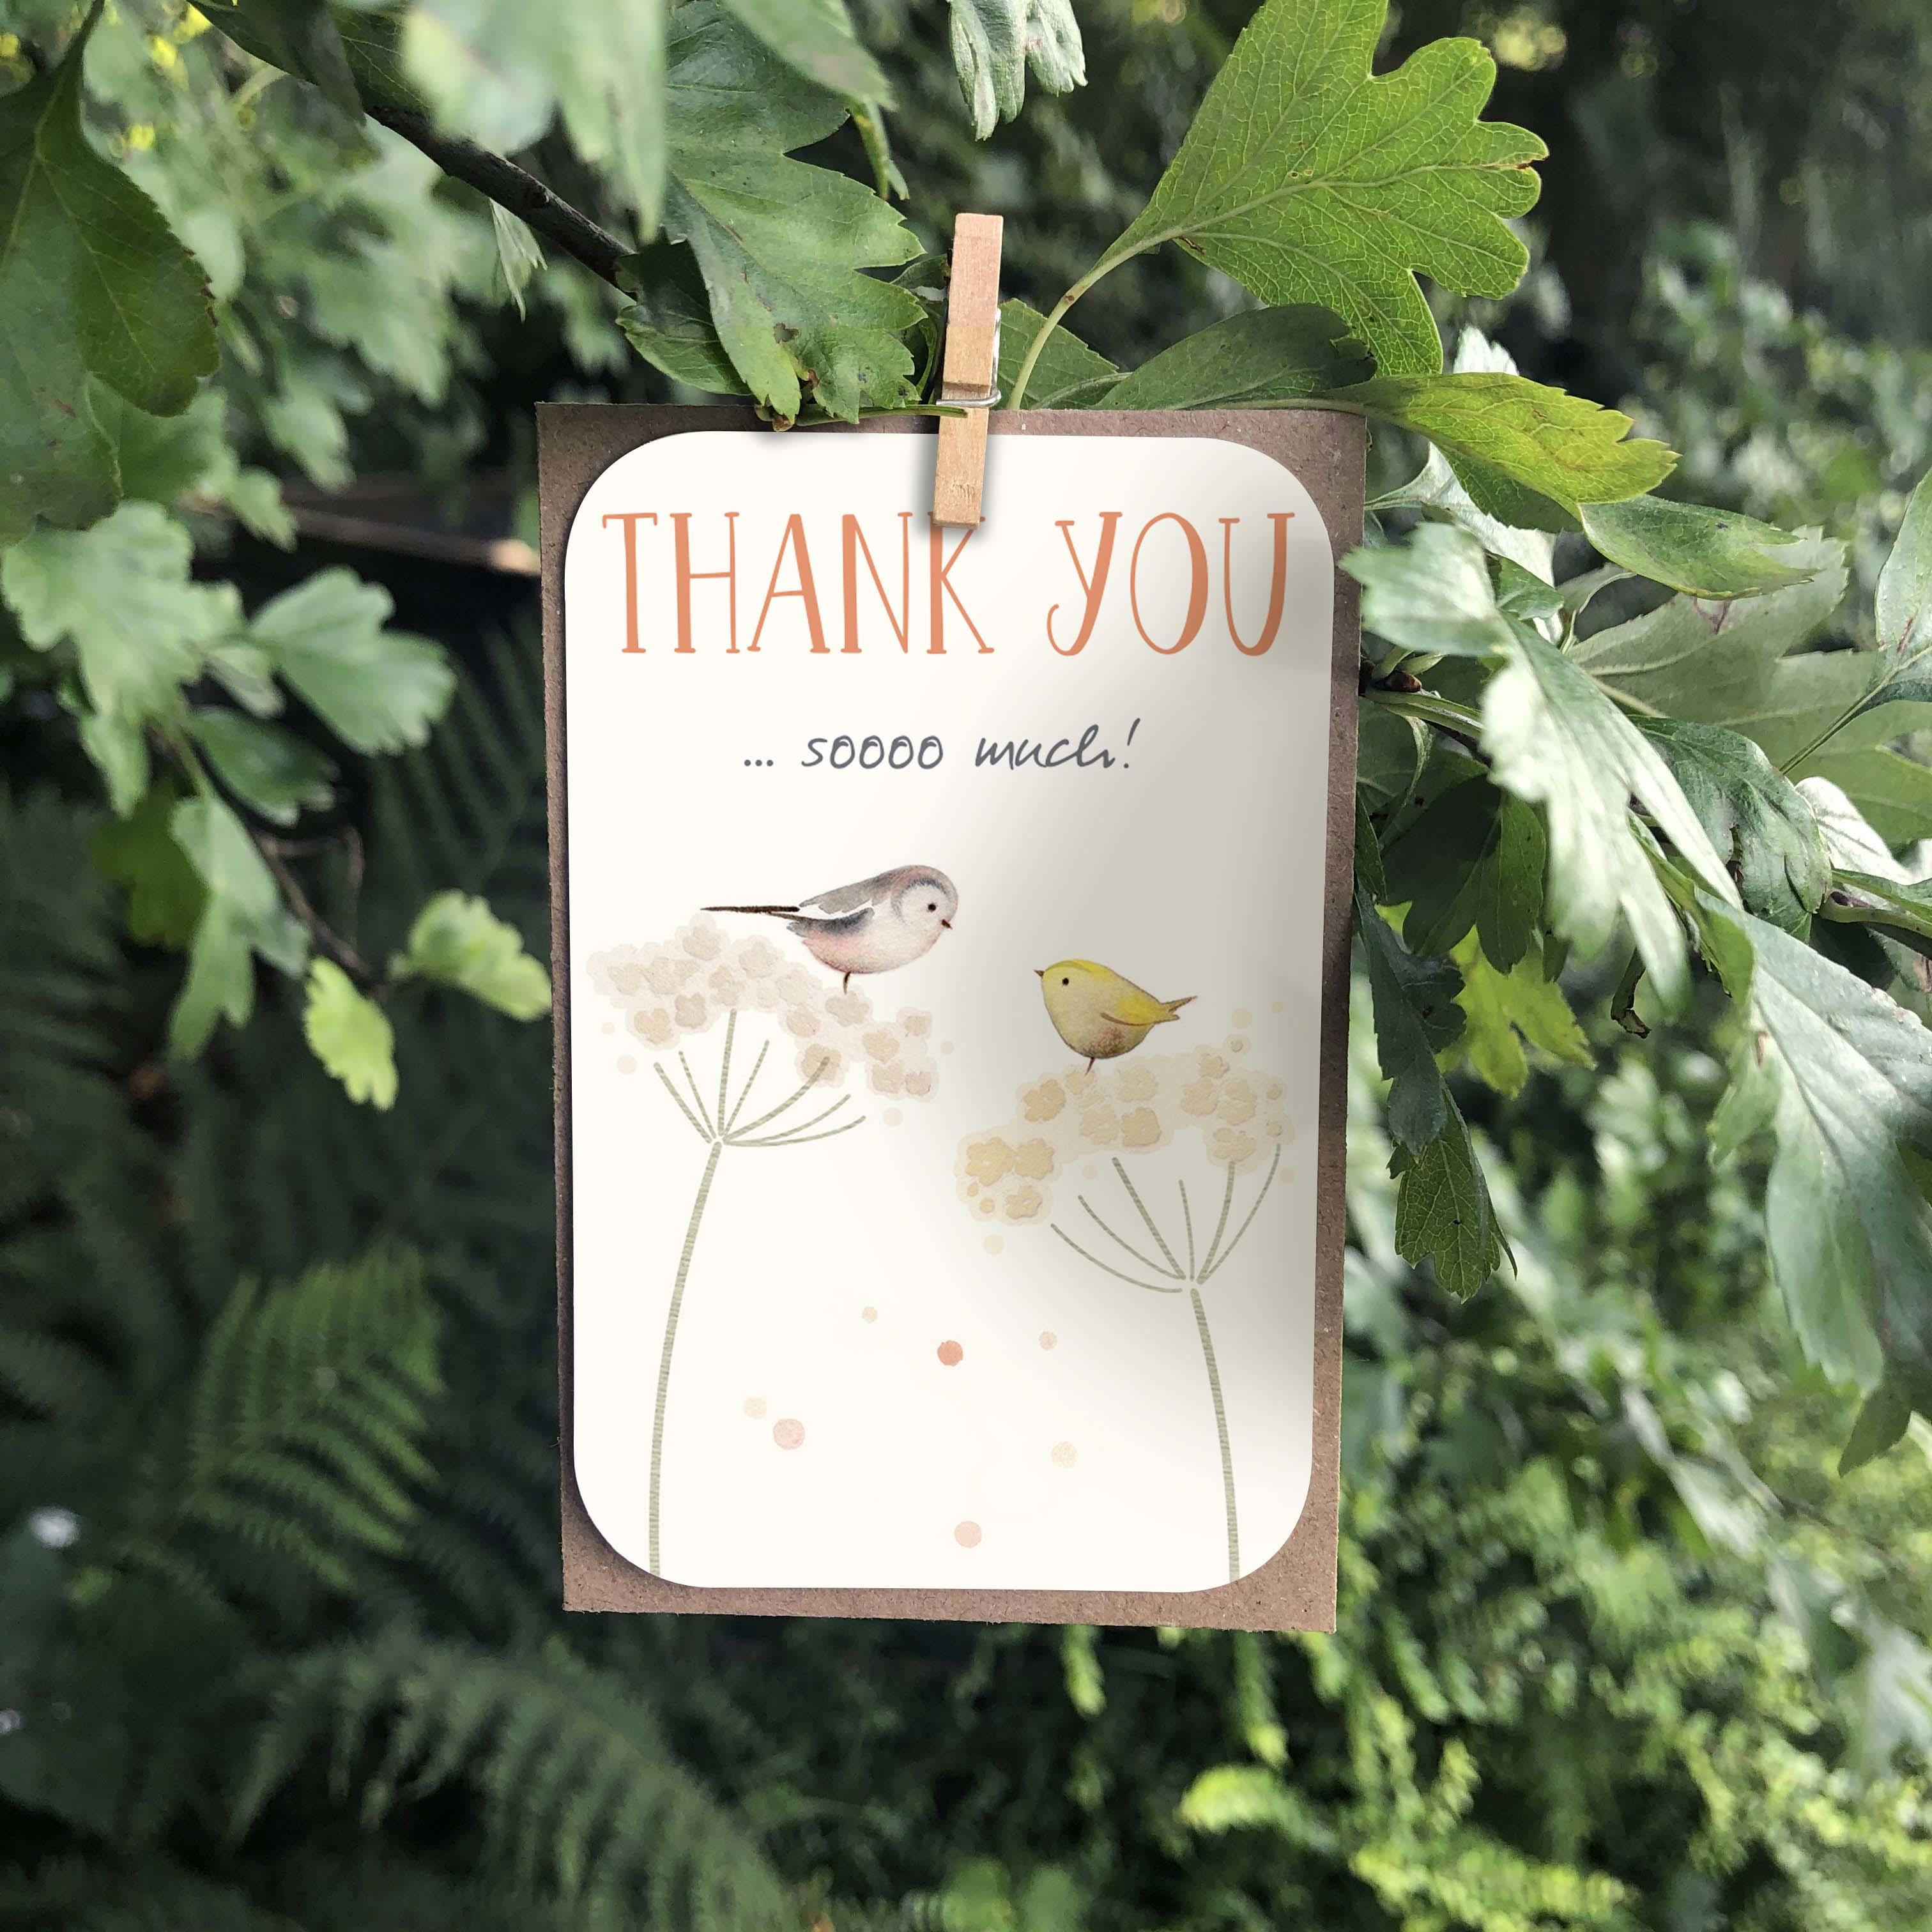 A small keepsake card with a “Thank You soooo much!” caption. Features an illustration of two cute birds sitting in hedgerow plants.